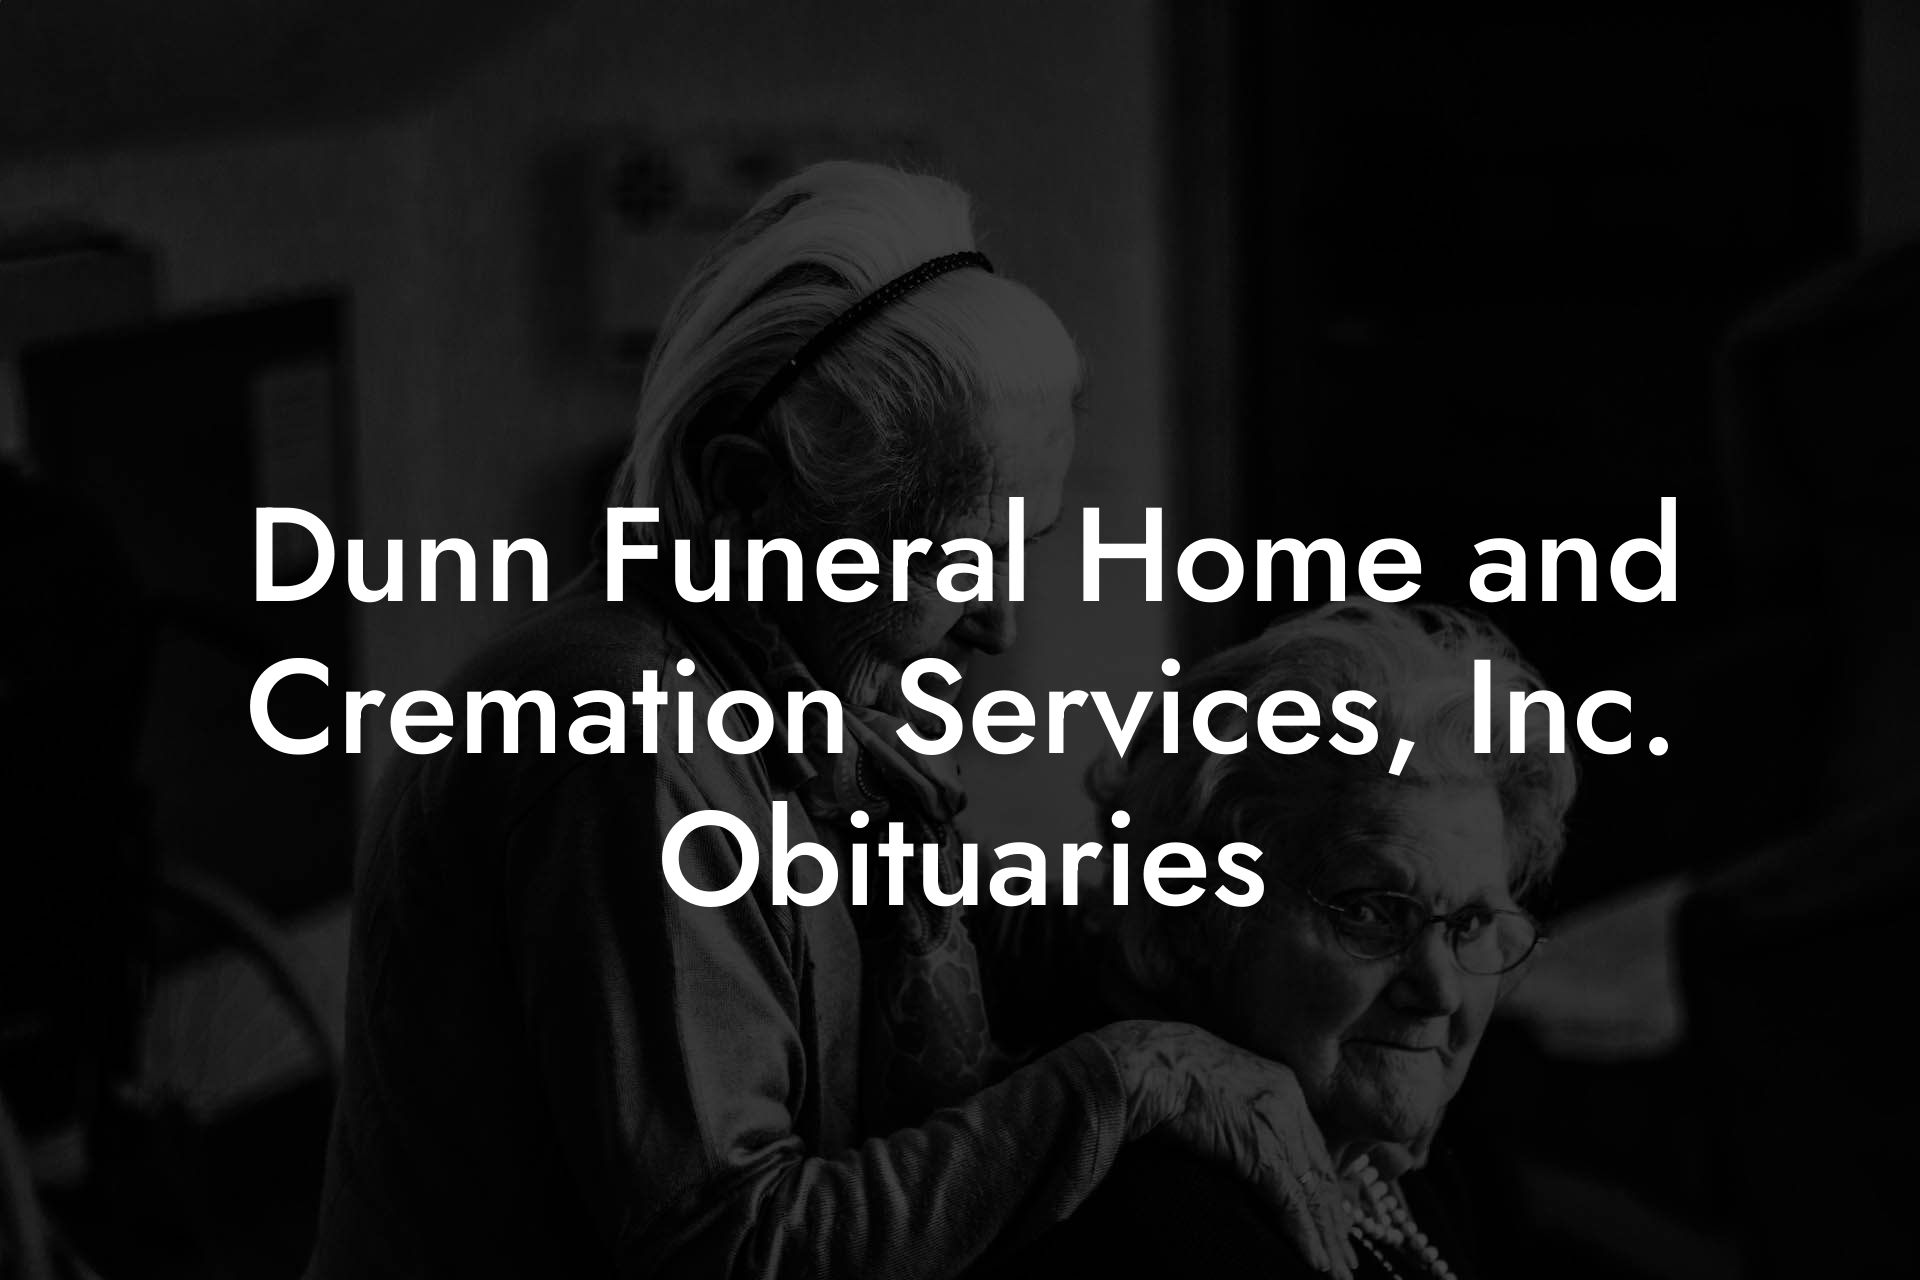 Dunn Funeral Home and Cremation Services, Inc. Obituaries